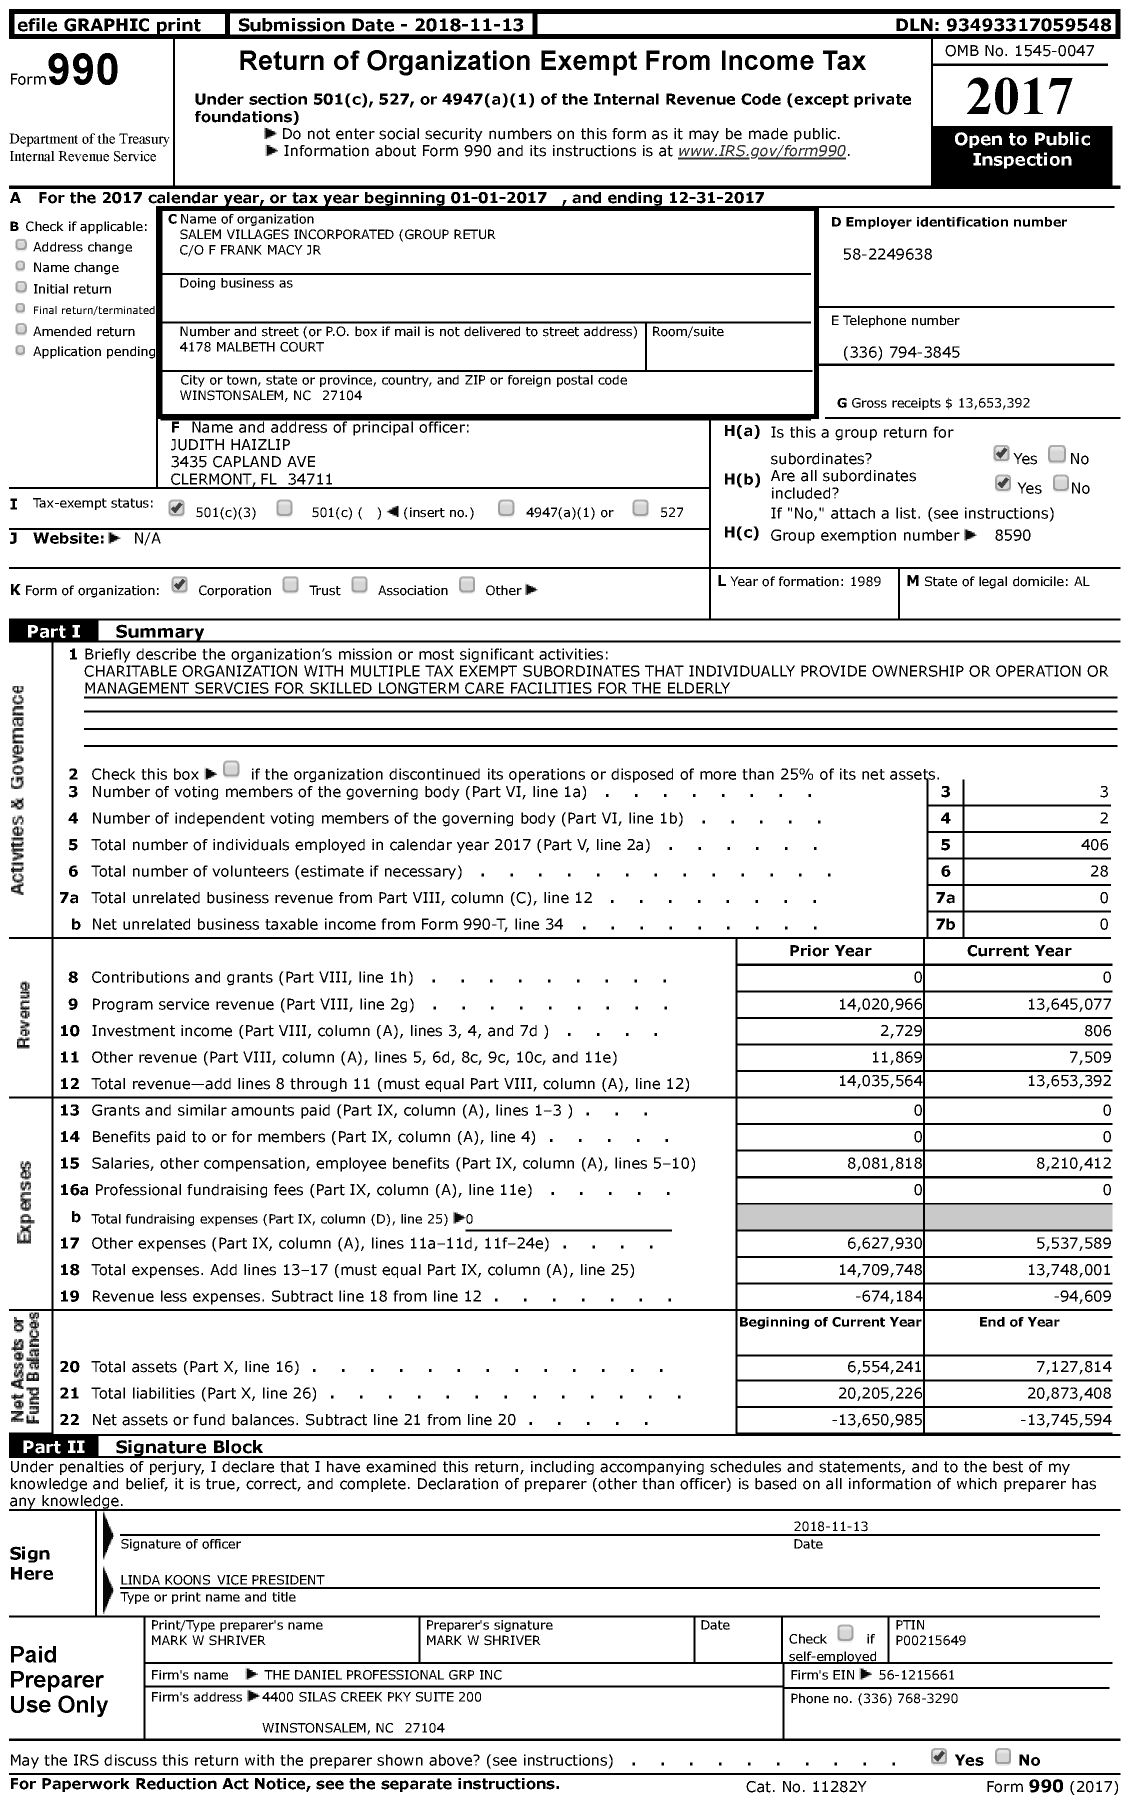 Image of first page of 2017 Form 990 for Salem Villages Incorporated (Group Return)